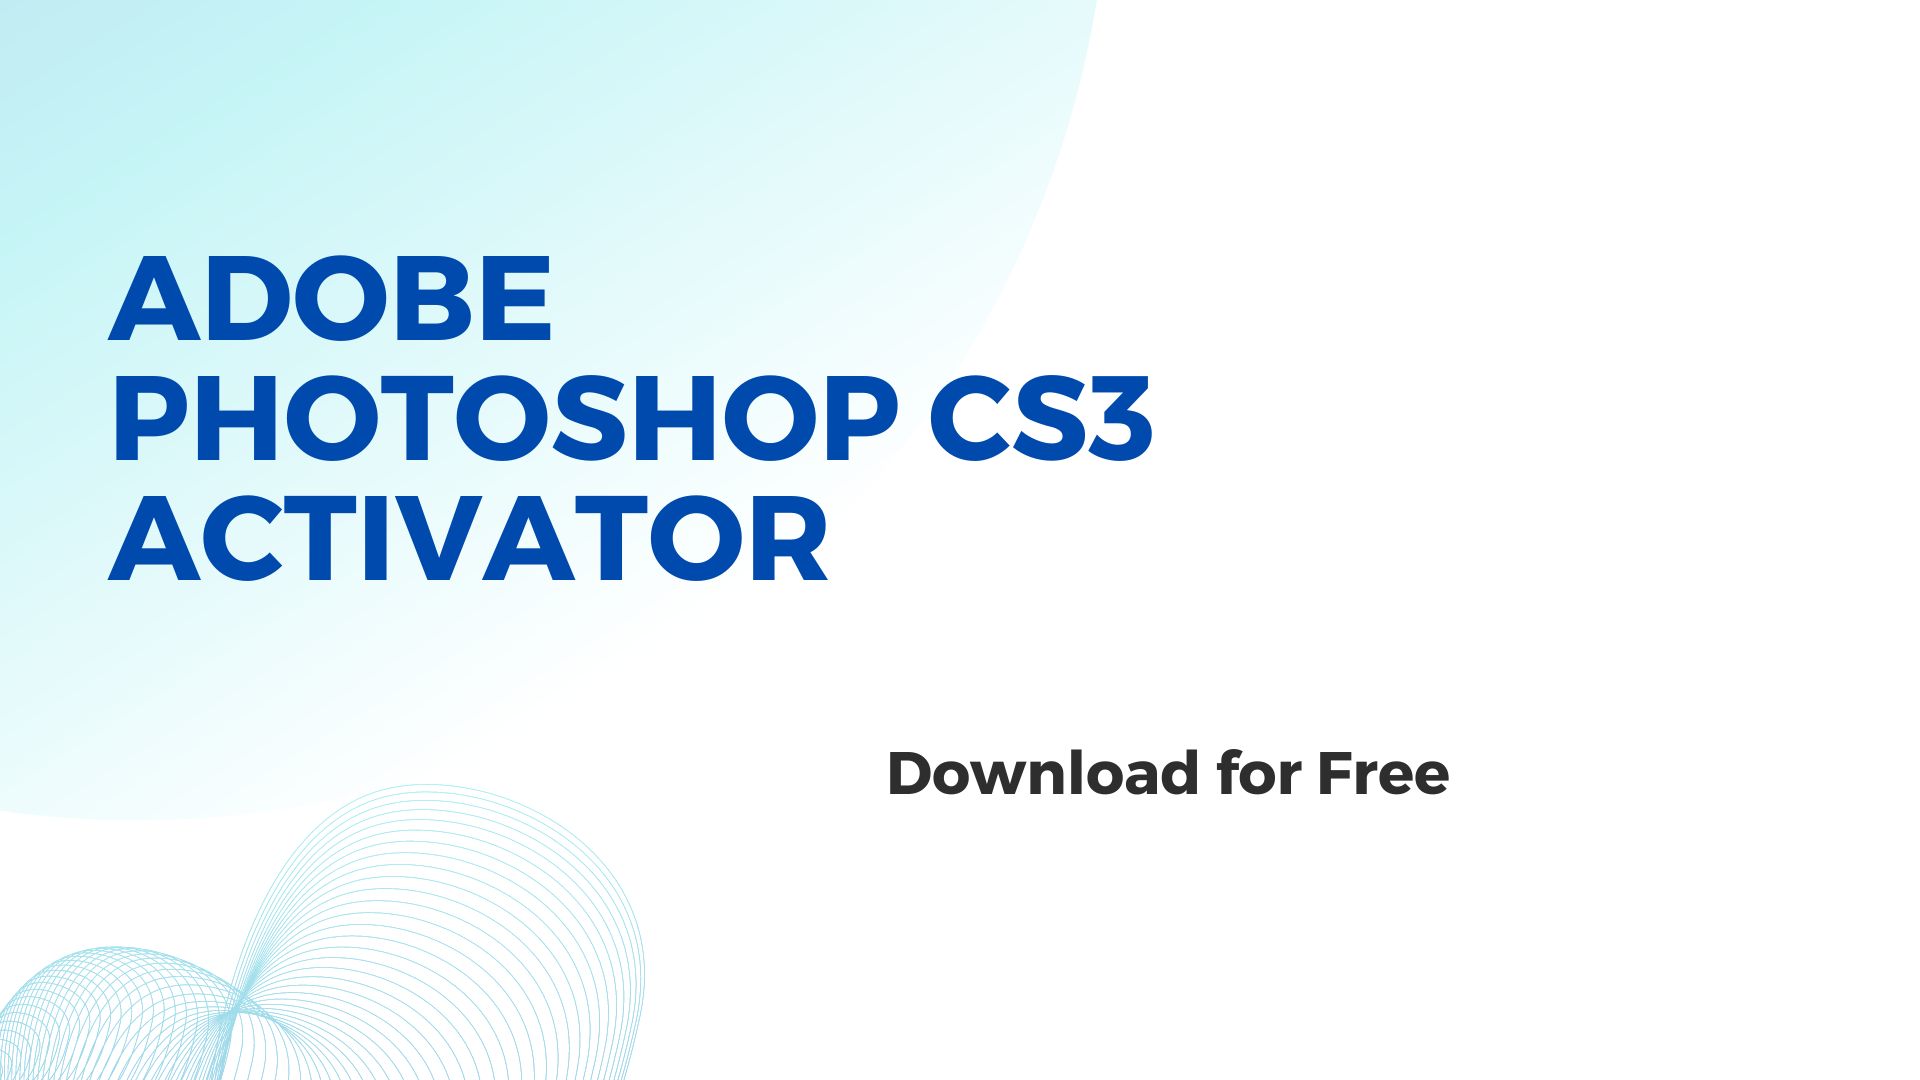 Adobe Photoshop CS3 Activator Download for Free